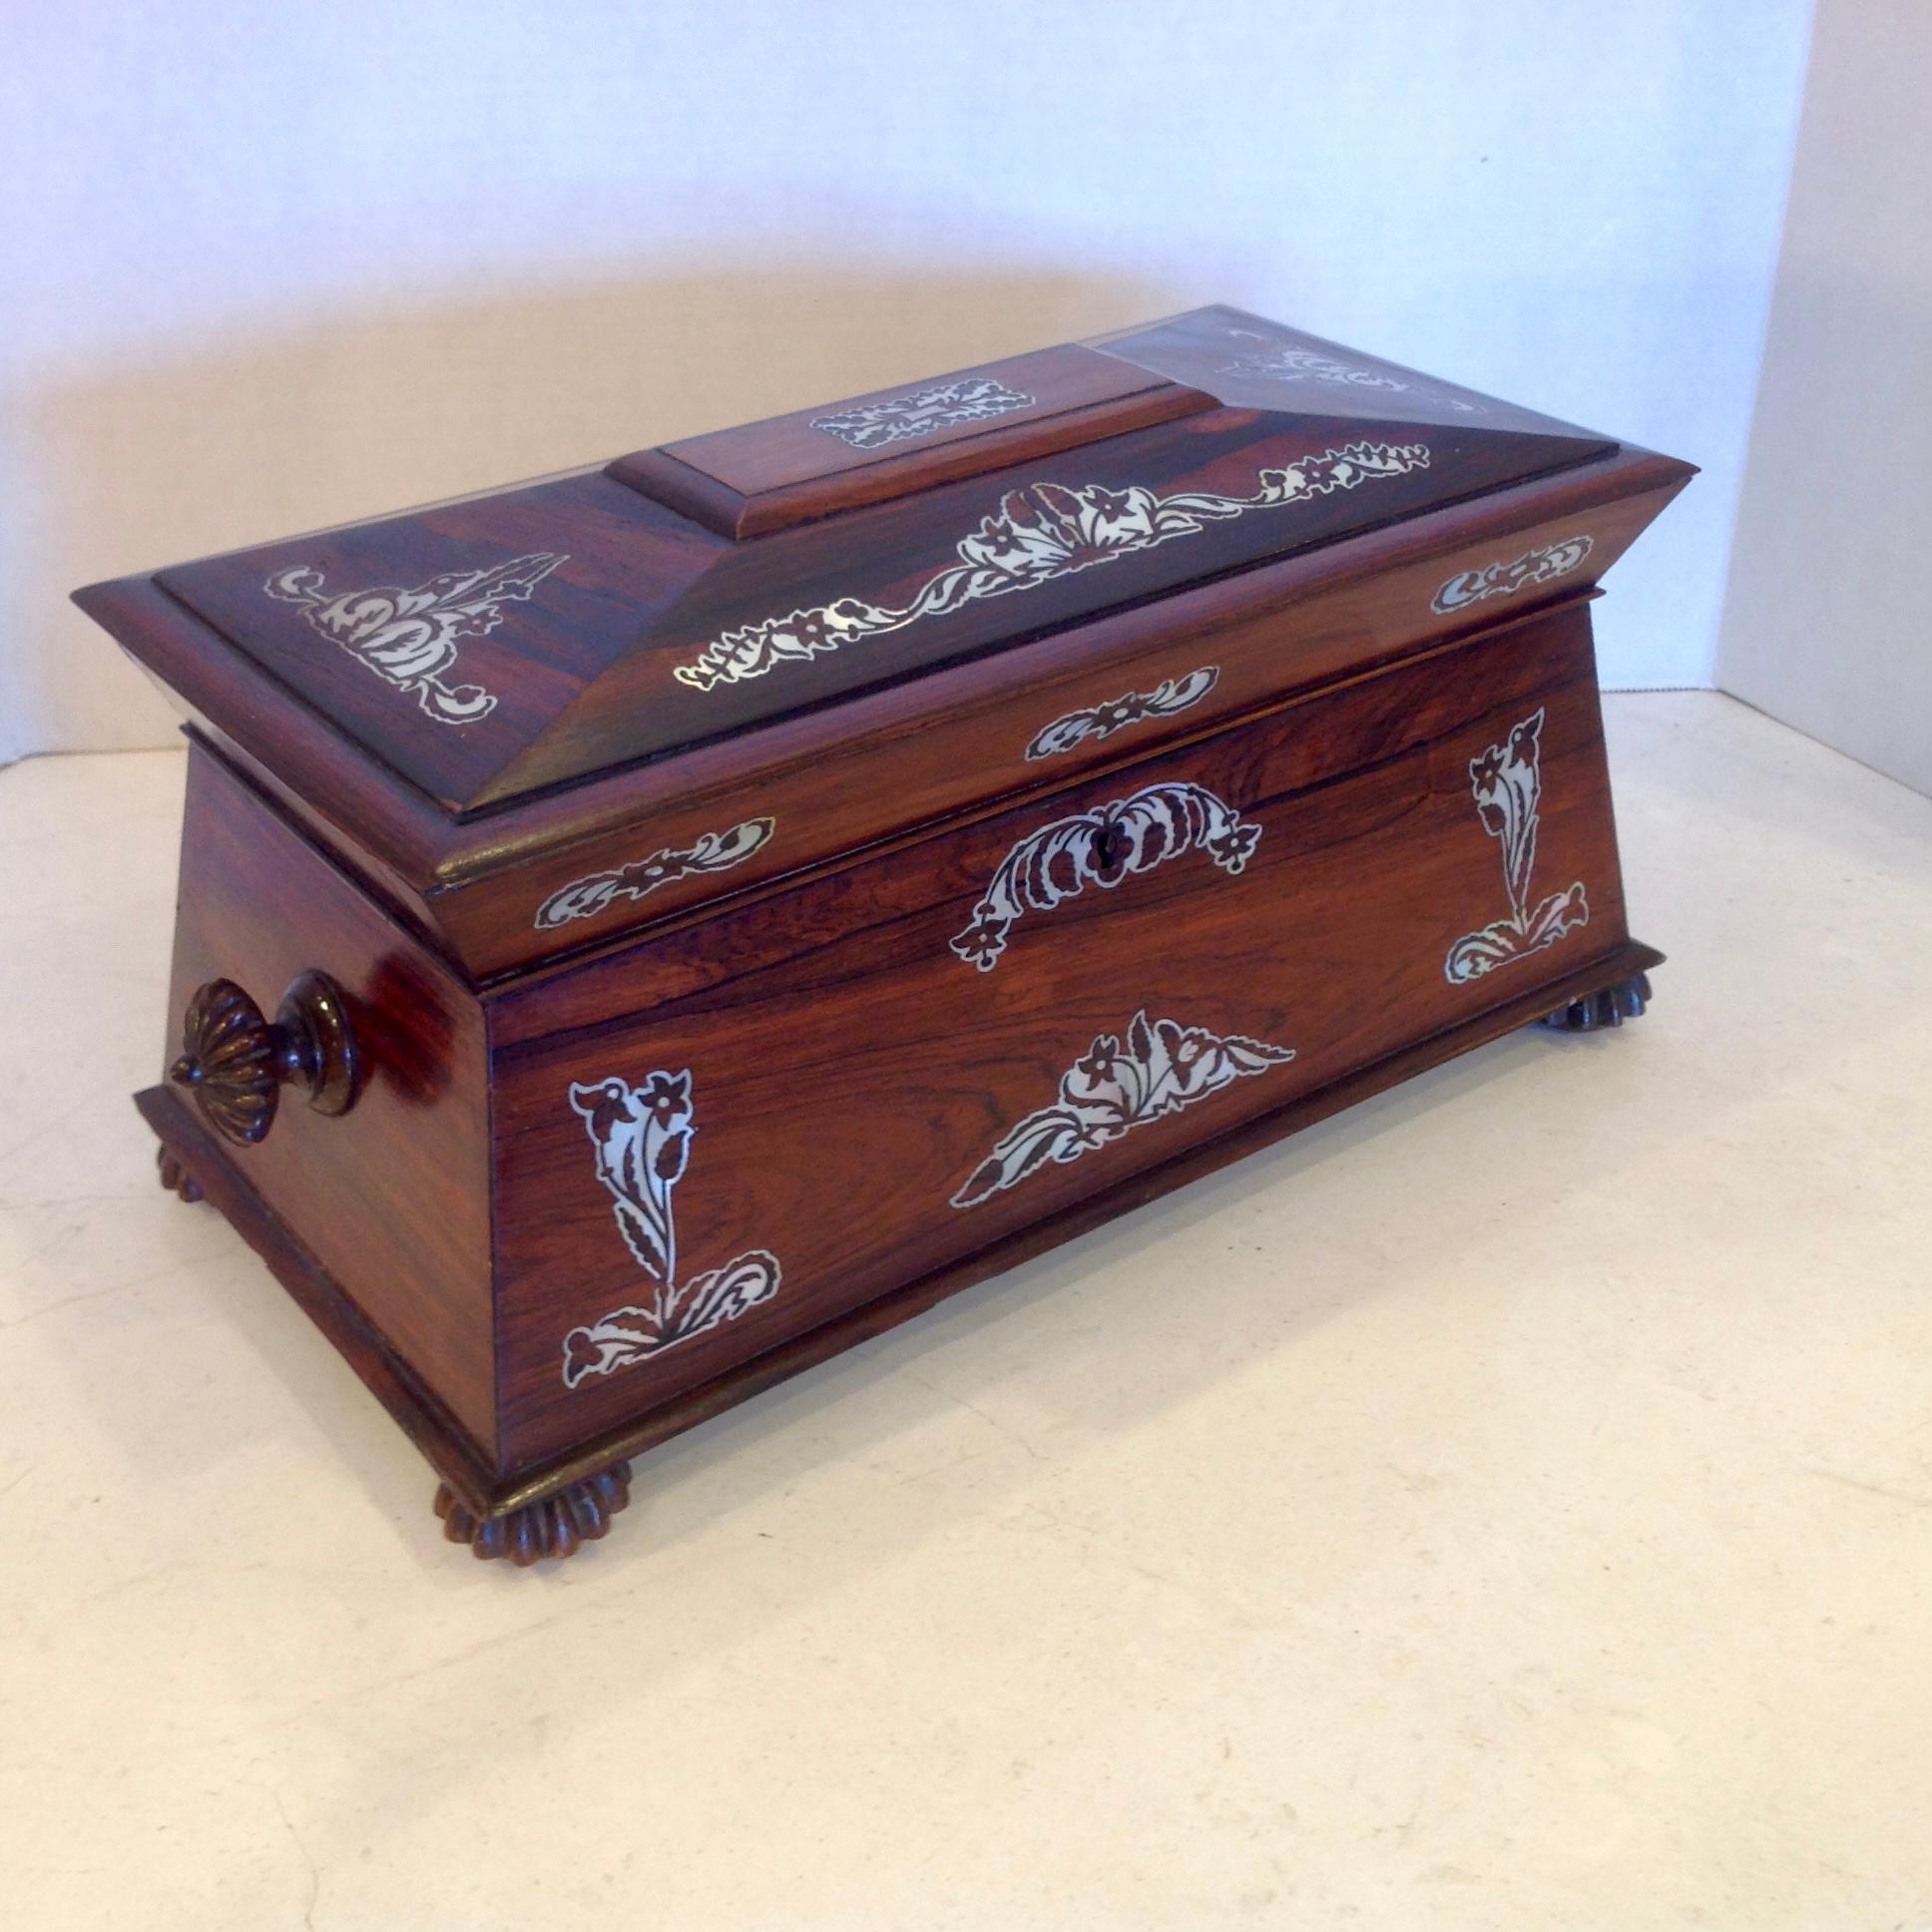 Finely fashioned in rosewood and appointed with elaborate mother of pearl inlays .
It is raised upon exquisitely carved feet with complementary handles .
It is generously scaled - far larger than most and made for the English market .